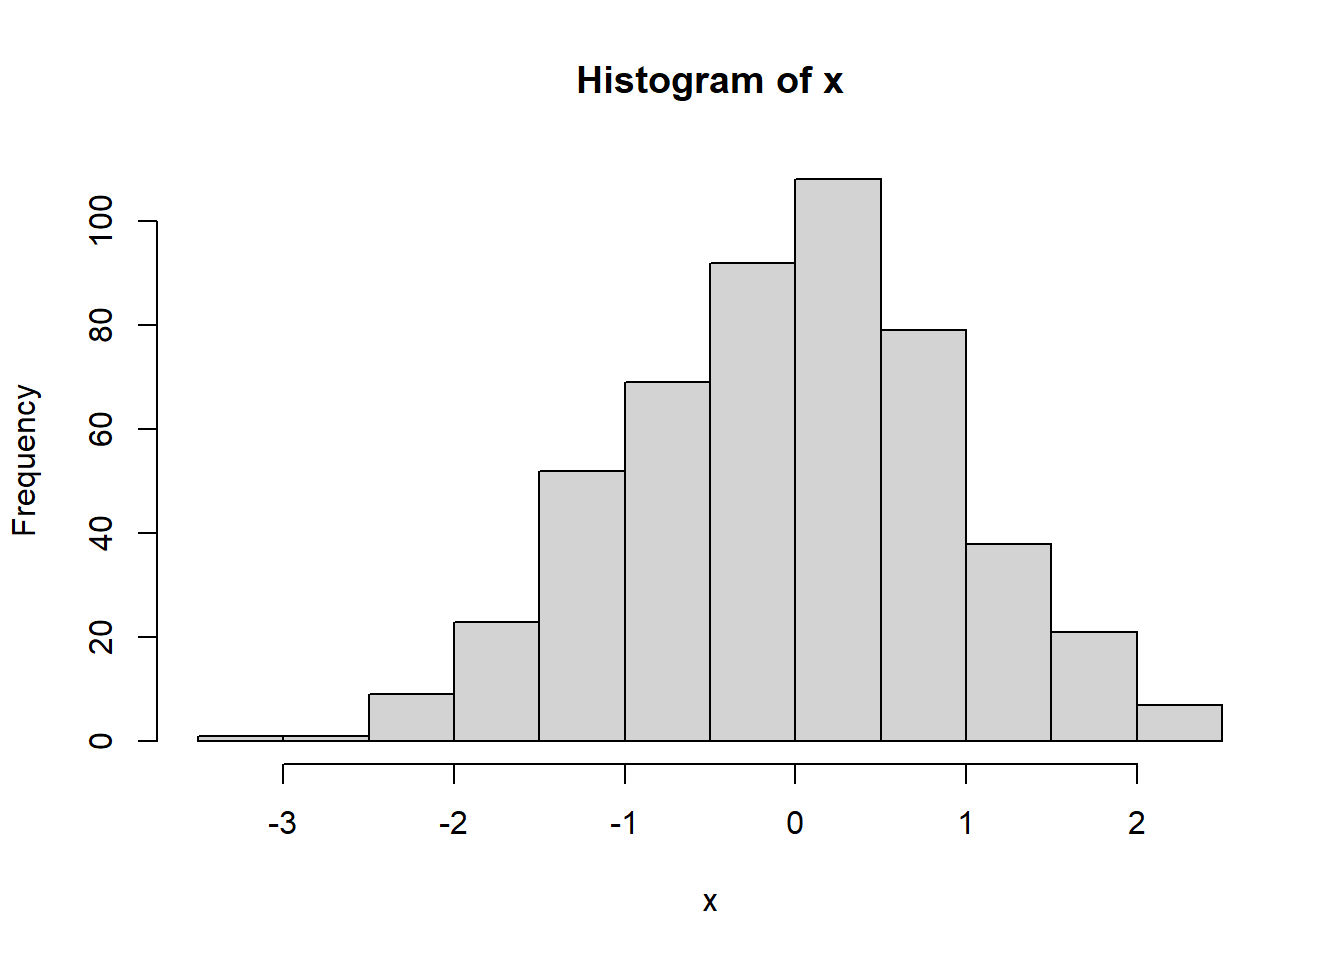 Plots for randomly generated numbers following a normal distribution.